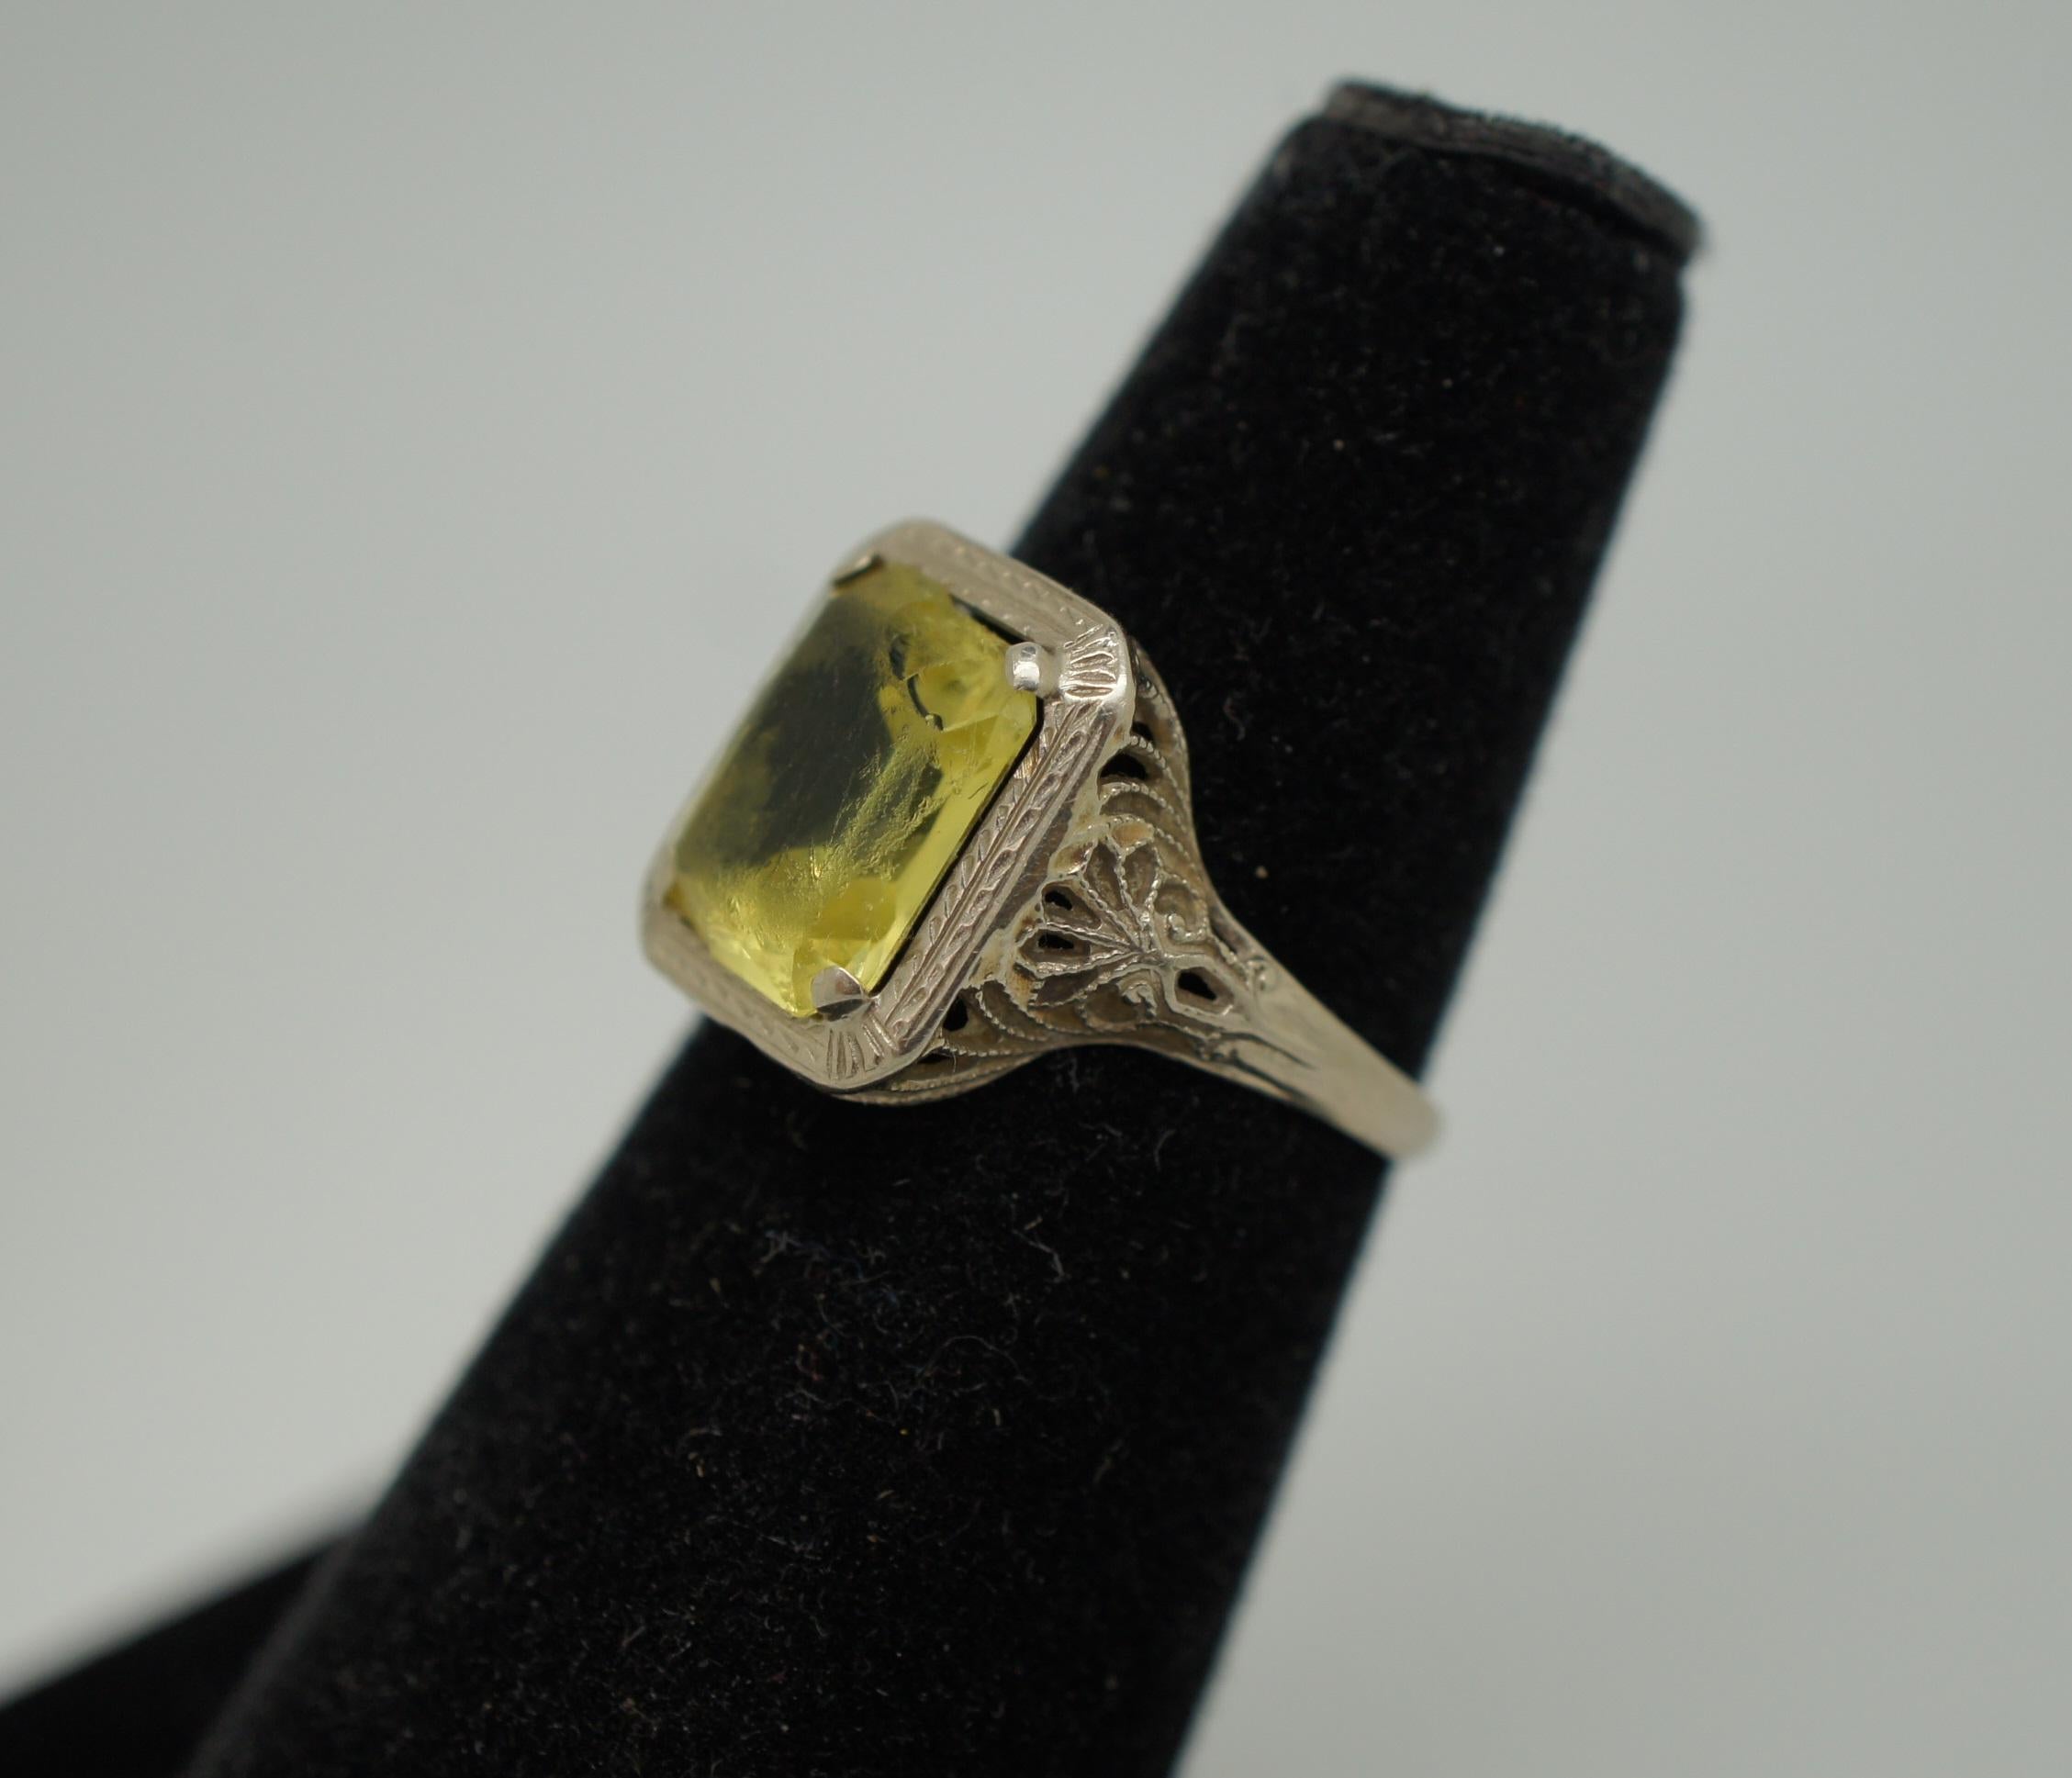 Antique Art Deco 14K White Gold Filigree Uranium Glass Cocktail Ring Size 5 In Good Condition For Sale In Dayton, OH